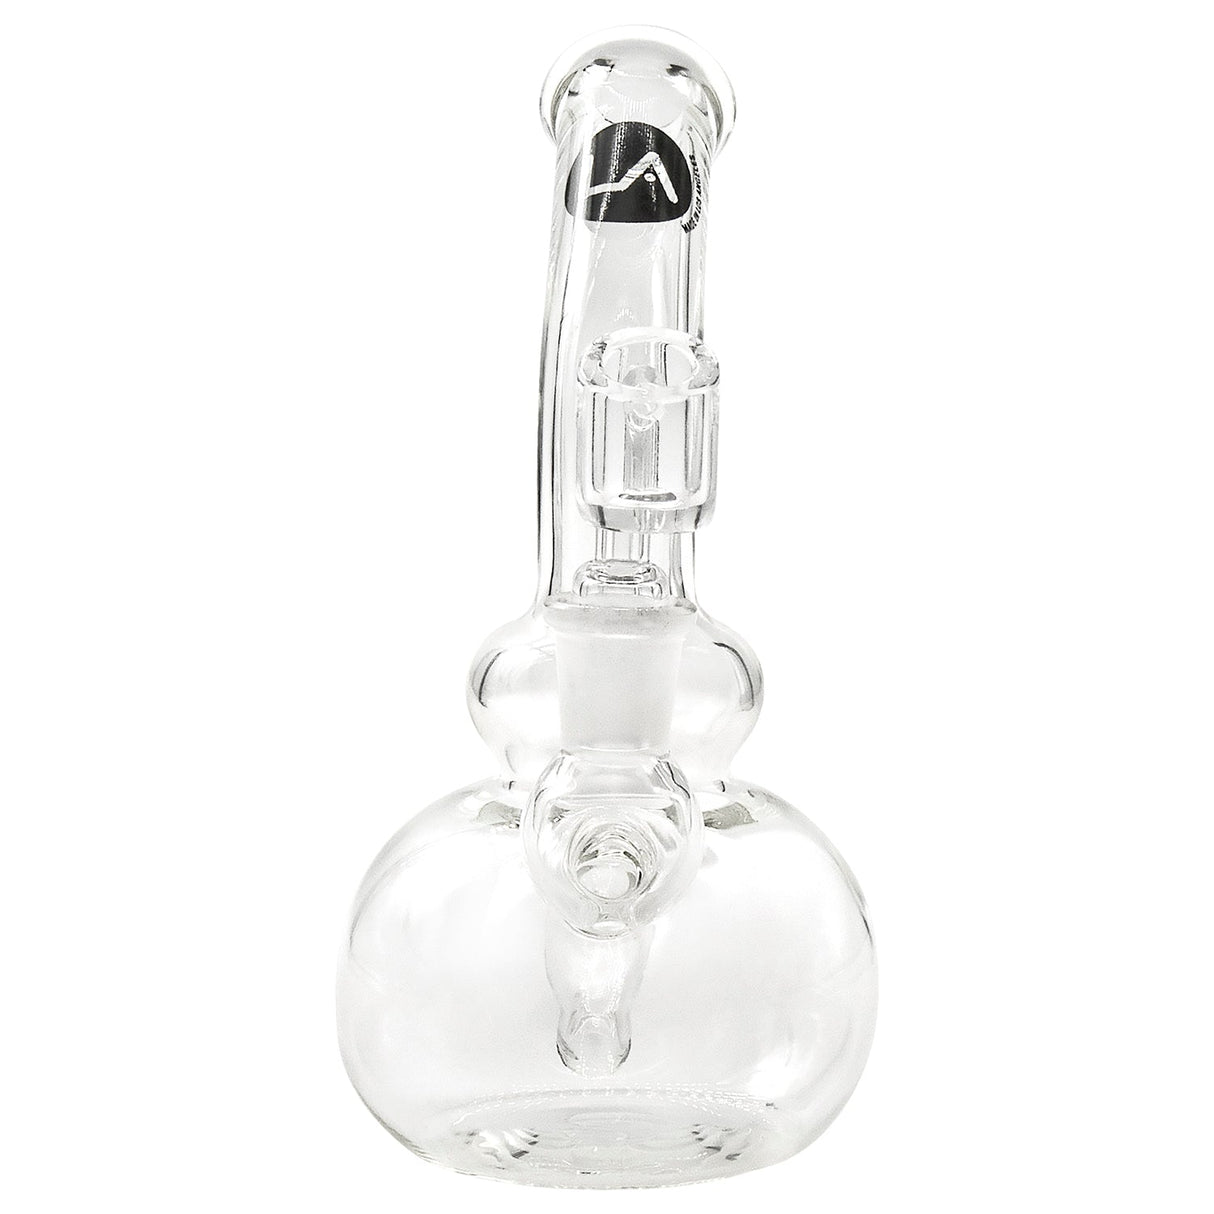 LA Pipes Bubble Concentrate Waterpipe, 6" Banger Hanger Dab Rig, Front View on White Background